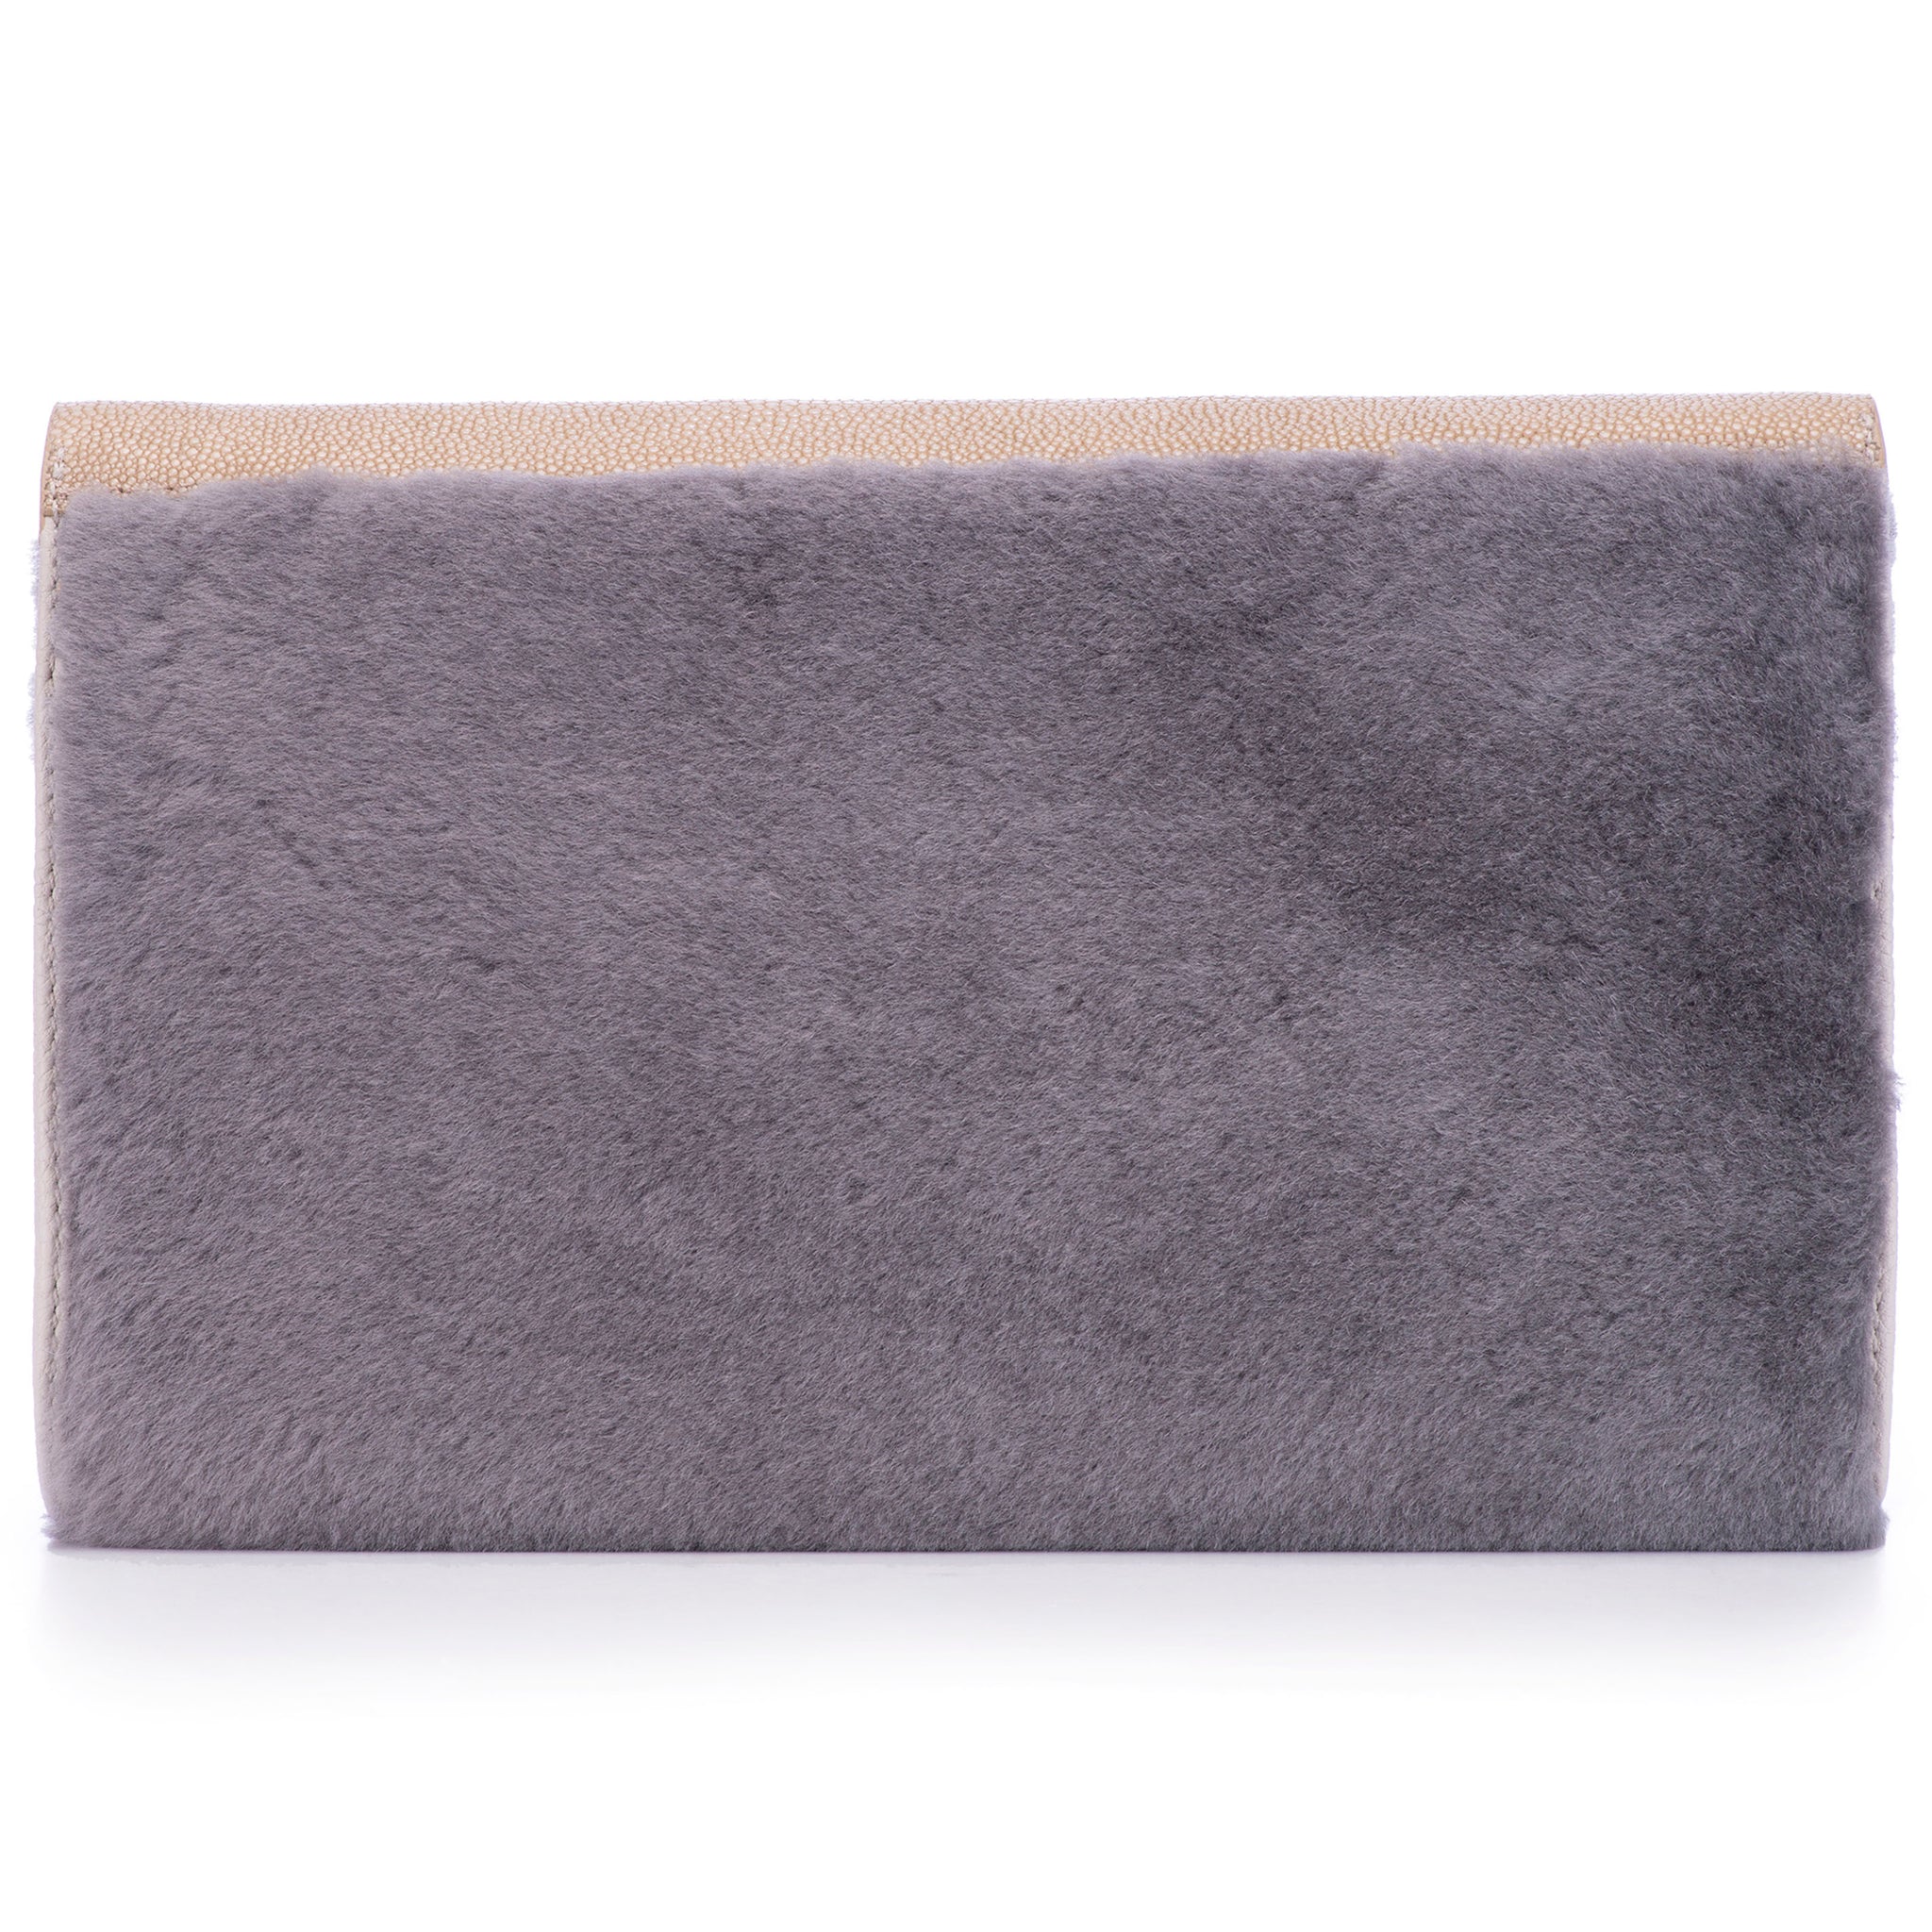 Taupe Shagreen Warm Gray Shearling Body Detachable Chain Holly Oversize Clutch Back View - Vivo Direct